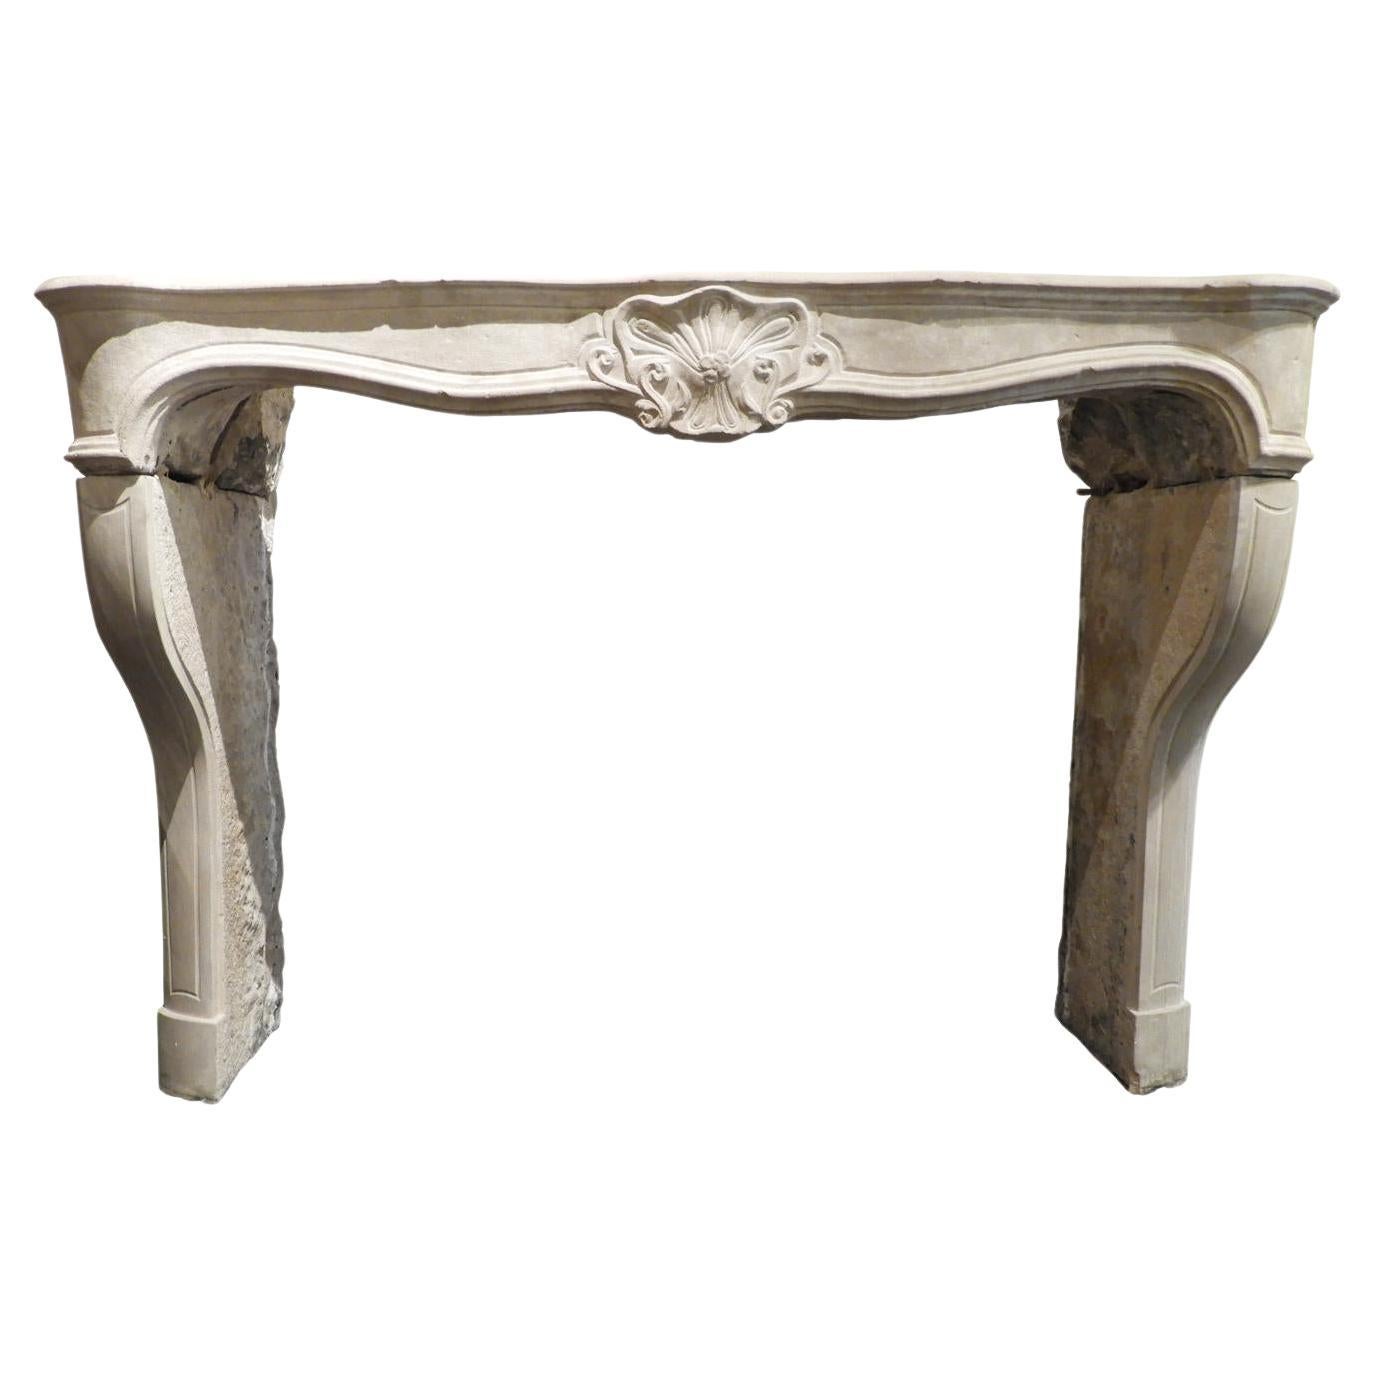 Early 19th Century Fireplace Mantel in Burgundian Stone